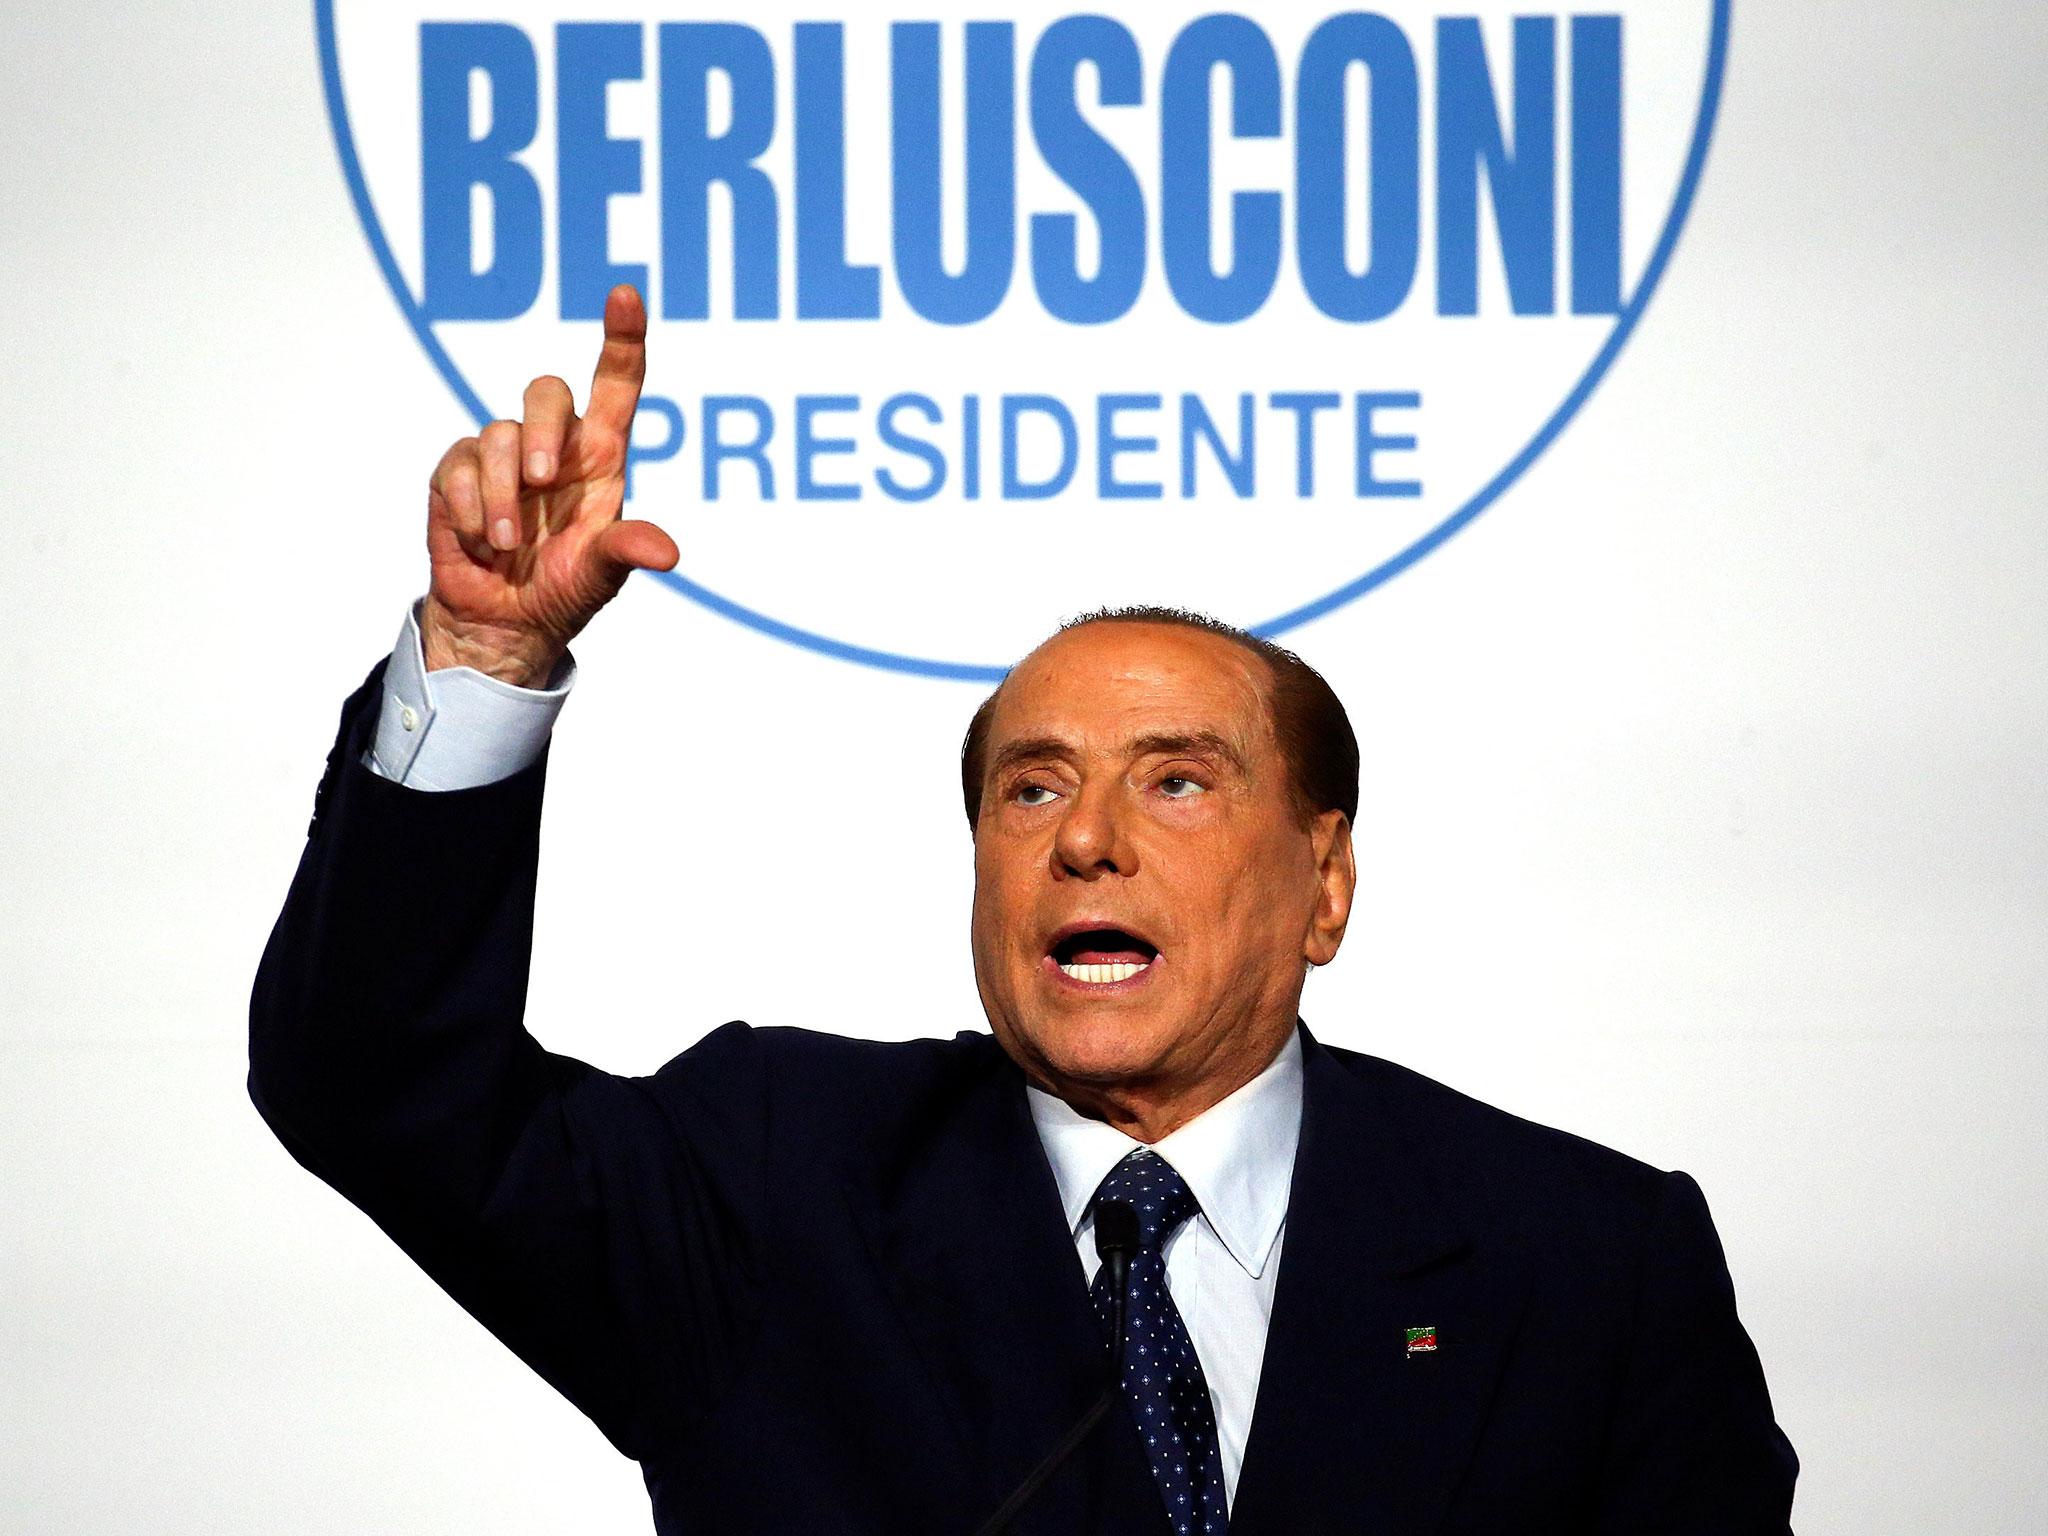 Forza Italia leader Silvio Berlusconi is barred from office, but will be kingmaker if his centre-right coalition wins Sunday's election